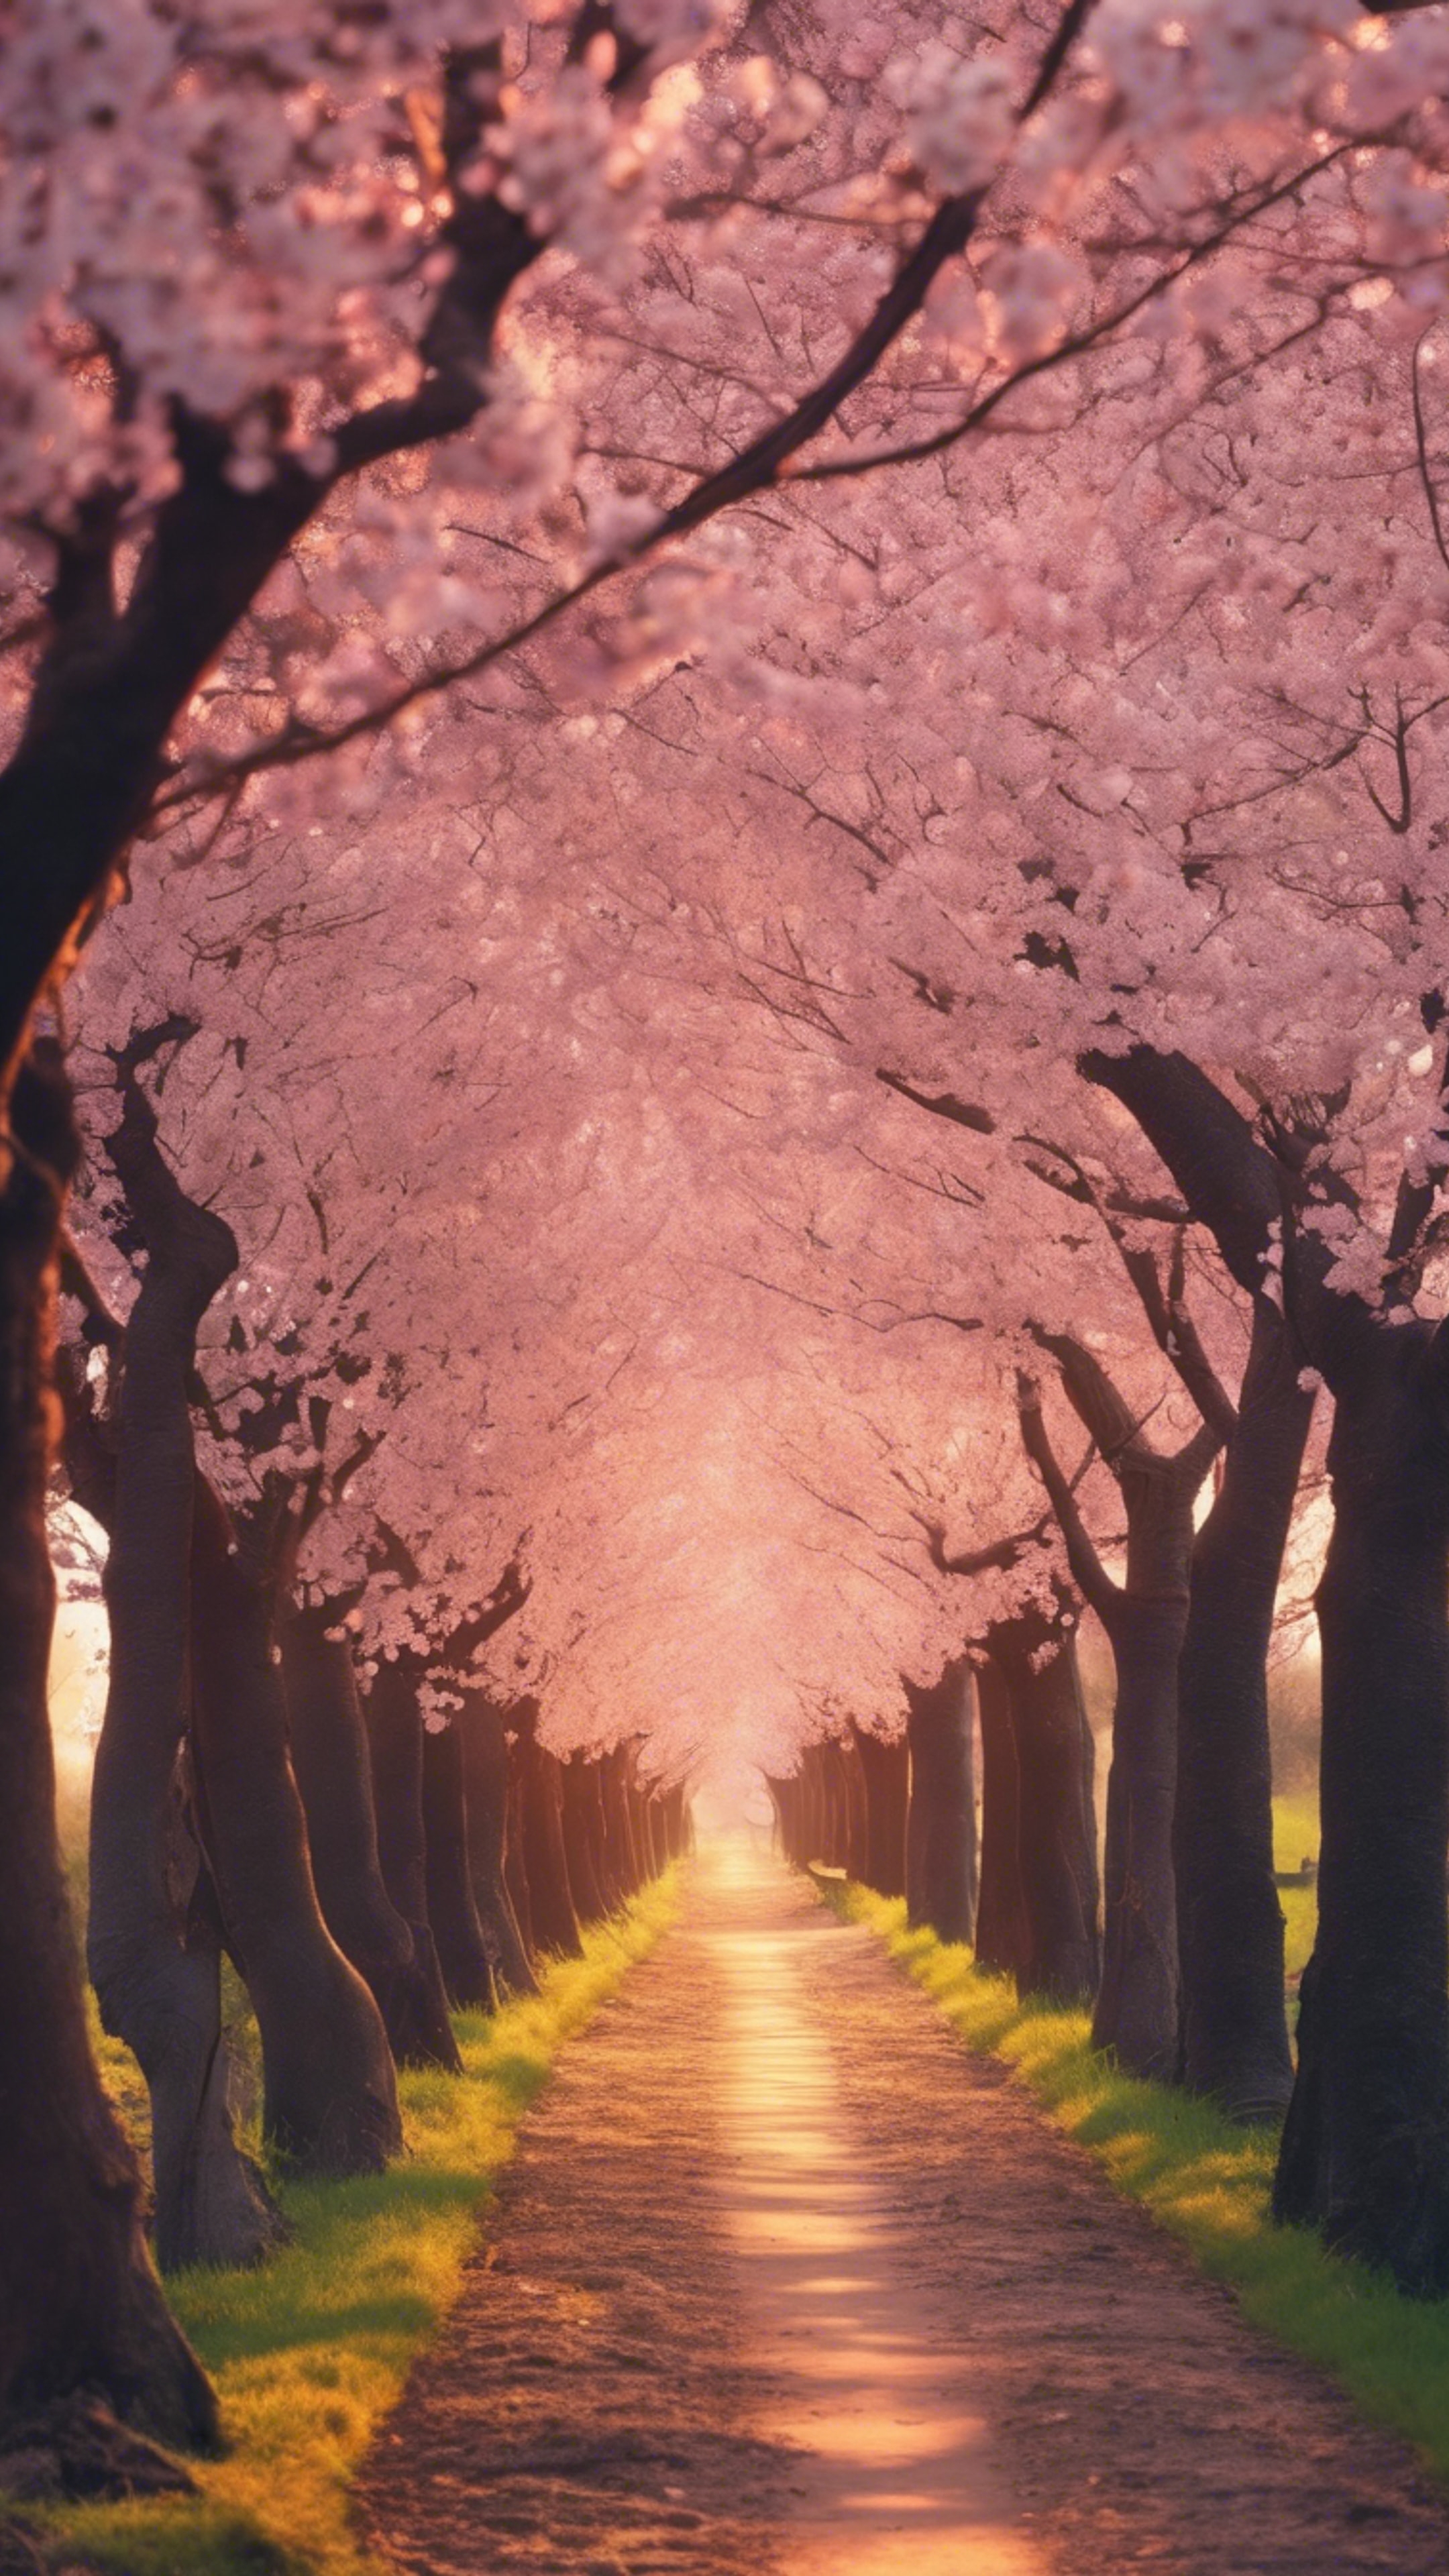 A narrow path lined with cherry blossoms under the warm glow of a magical sunset.壁紙[a188dfd7d1404974b936]